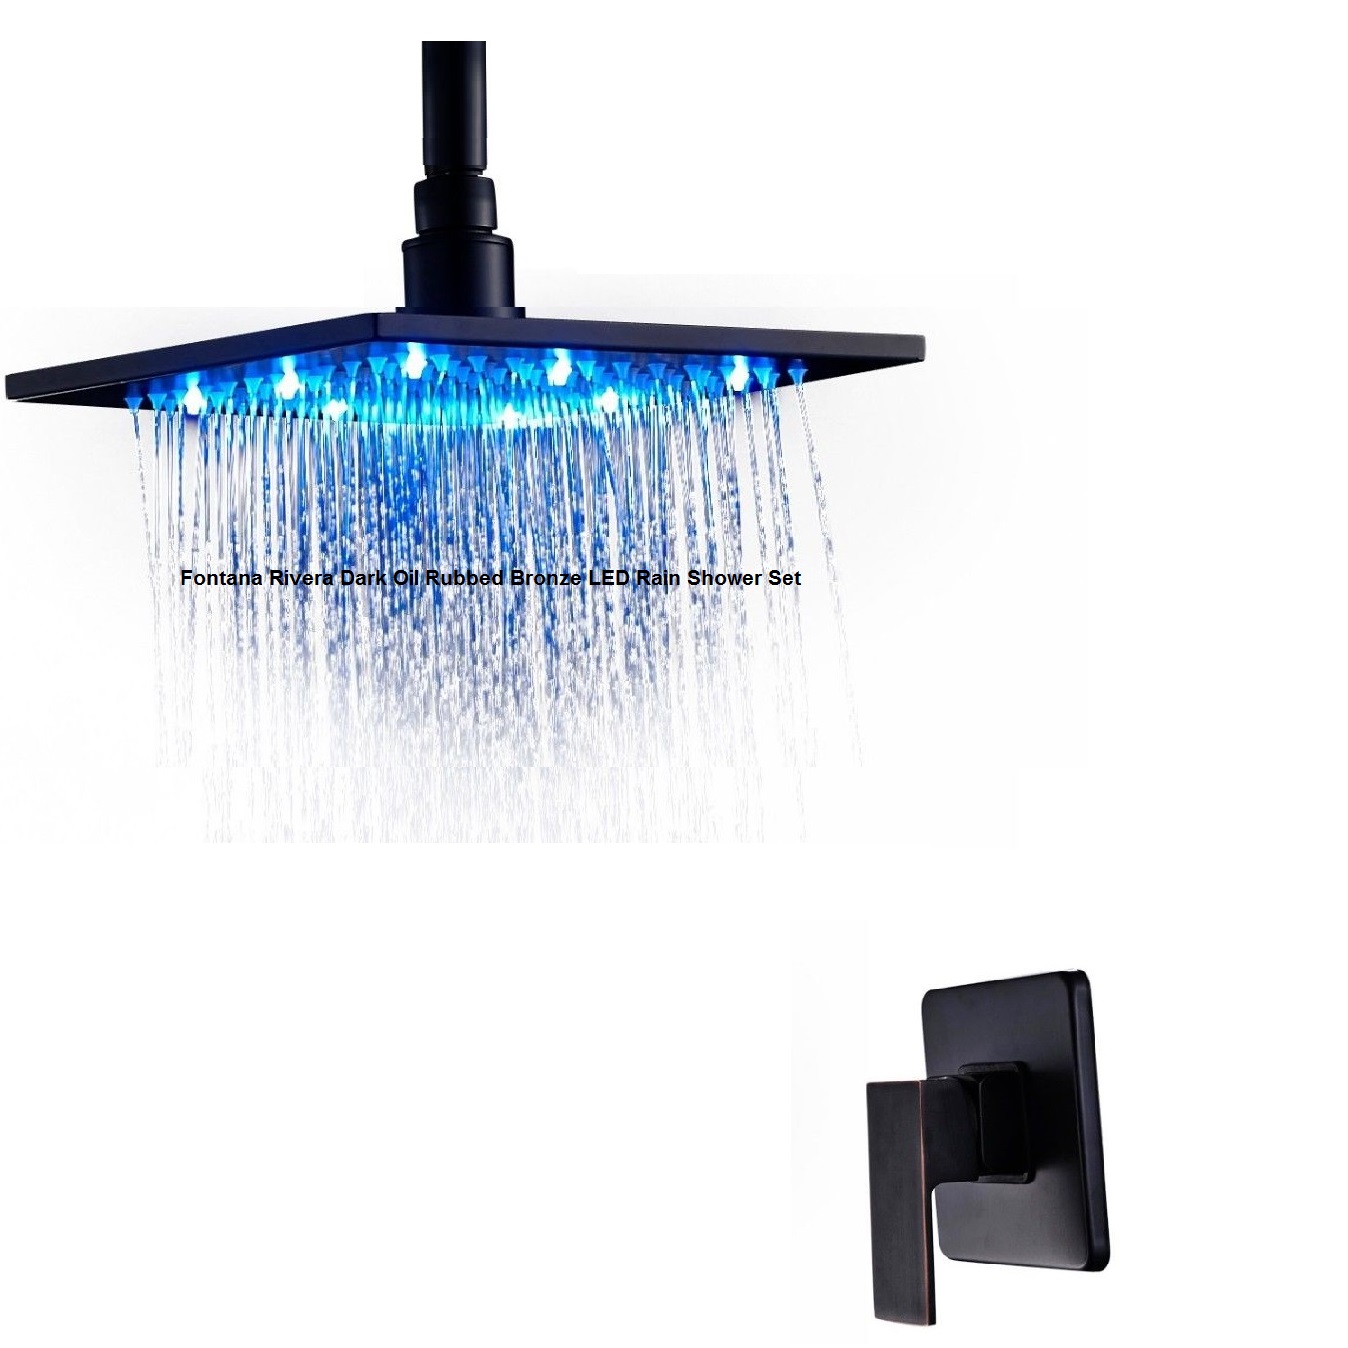 Fontana Rivera-DARK-Oil Rubbed Bronze-Shower-Set With-LED Color